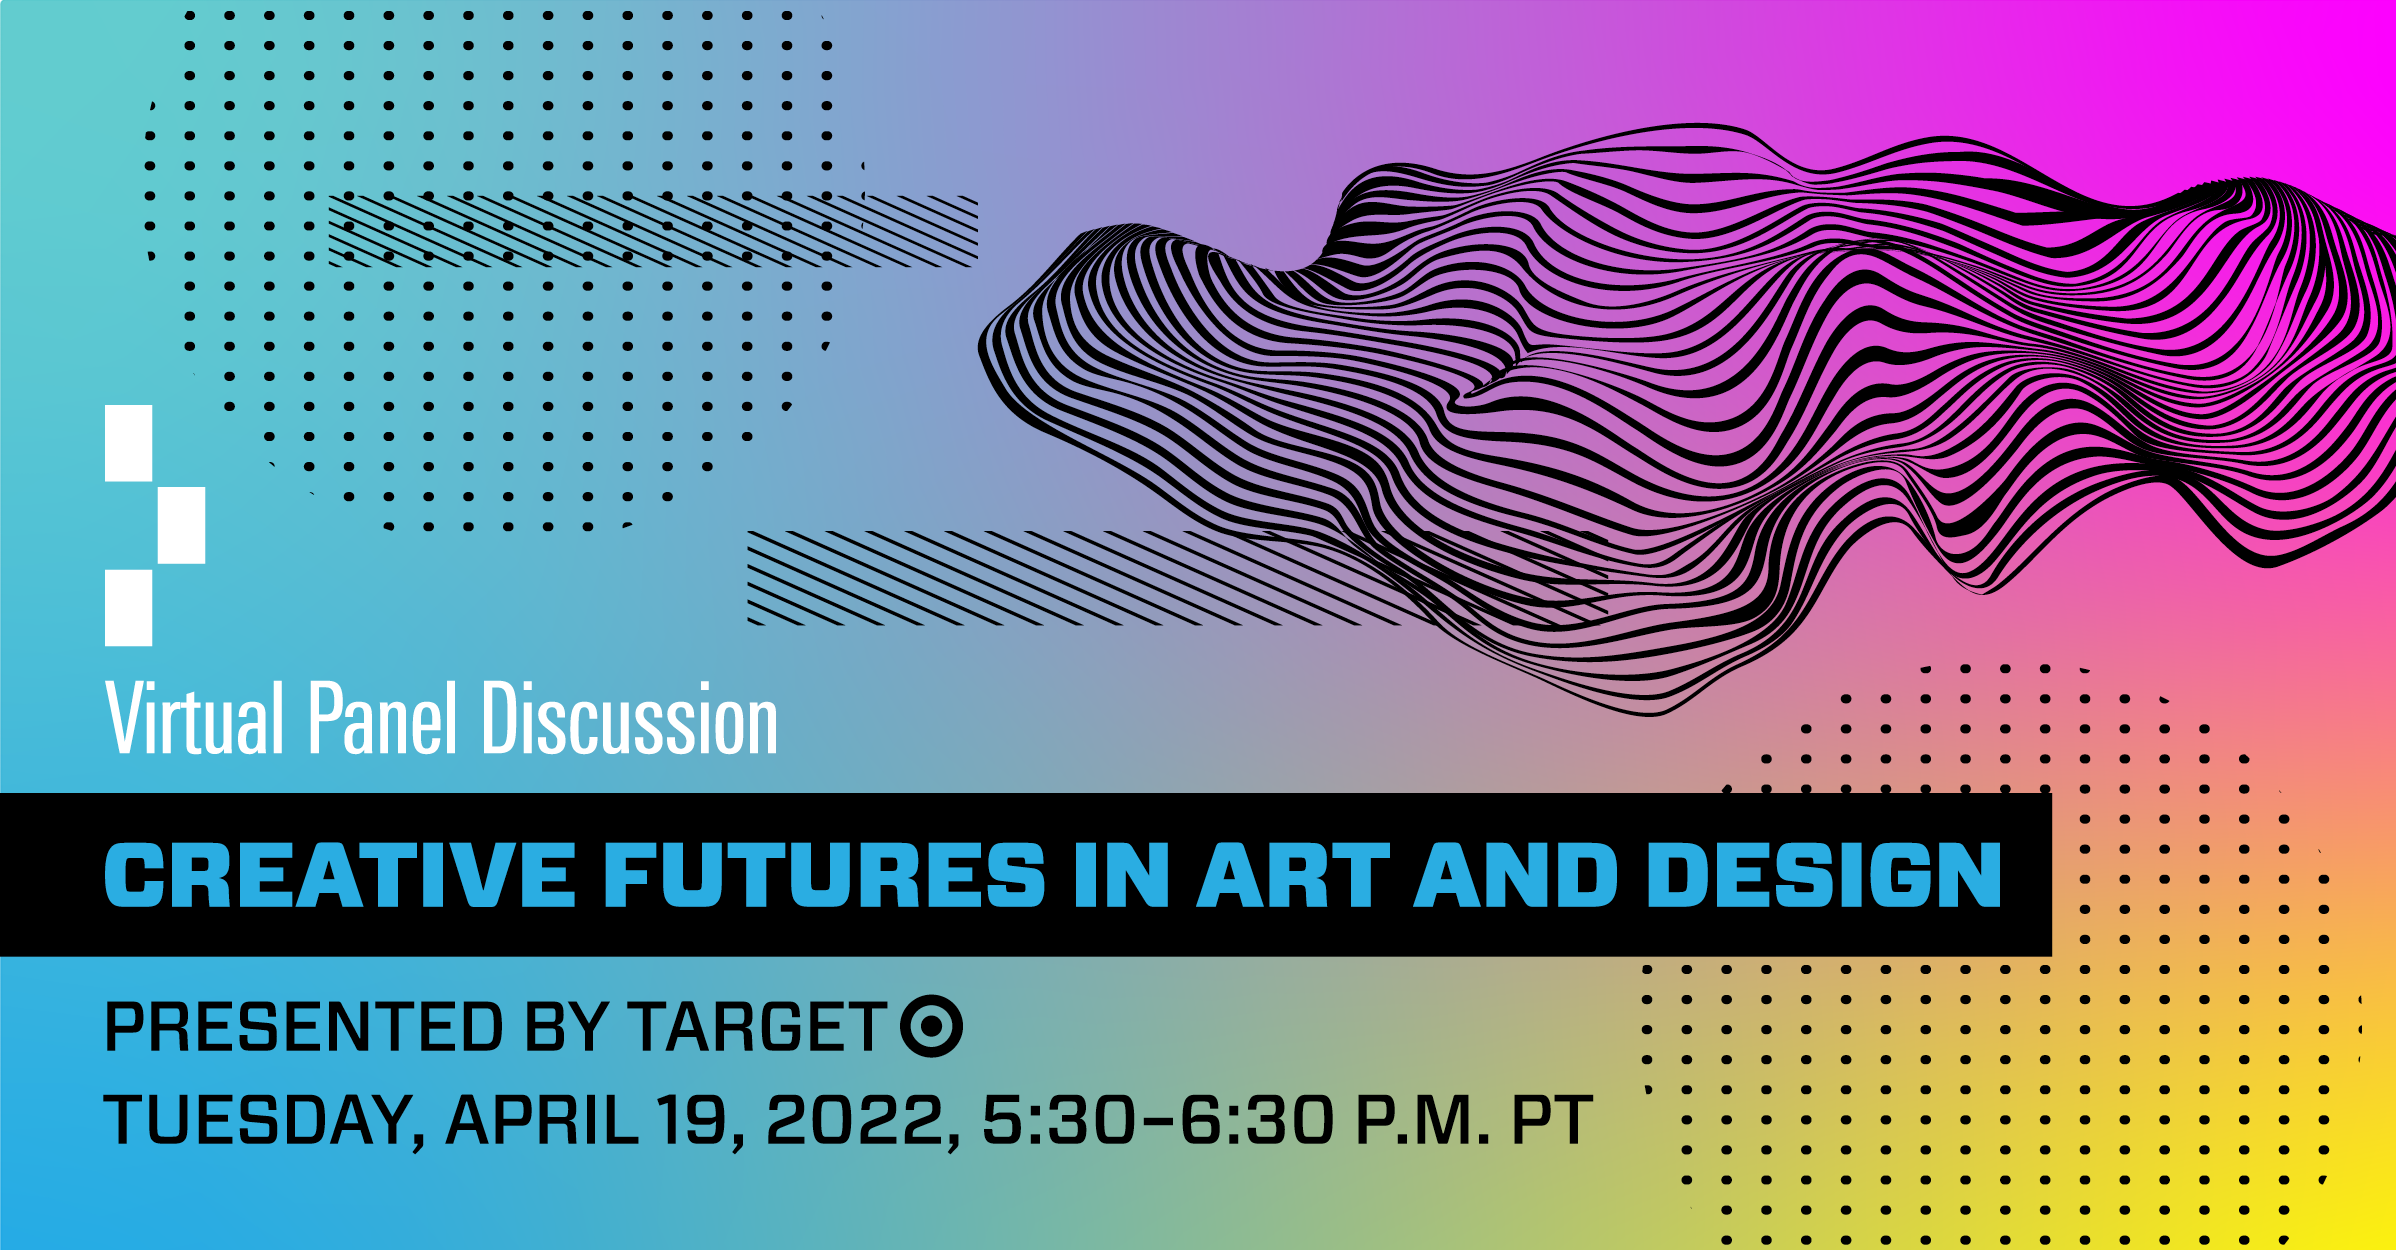 Creative Futures in Art and Design Panel Discussion Presented by Target